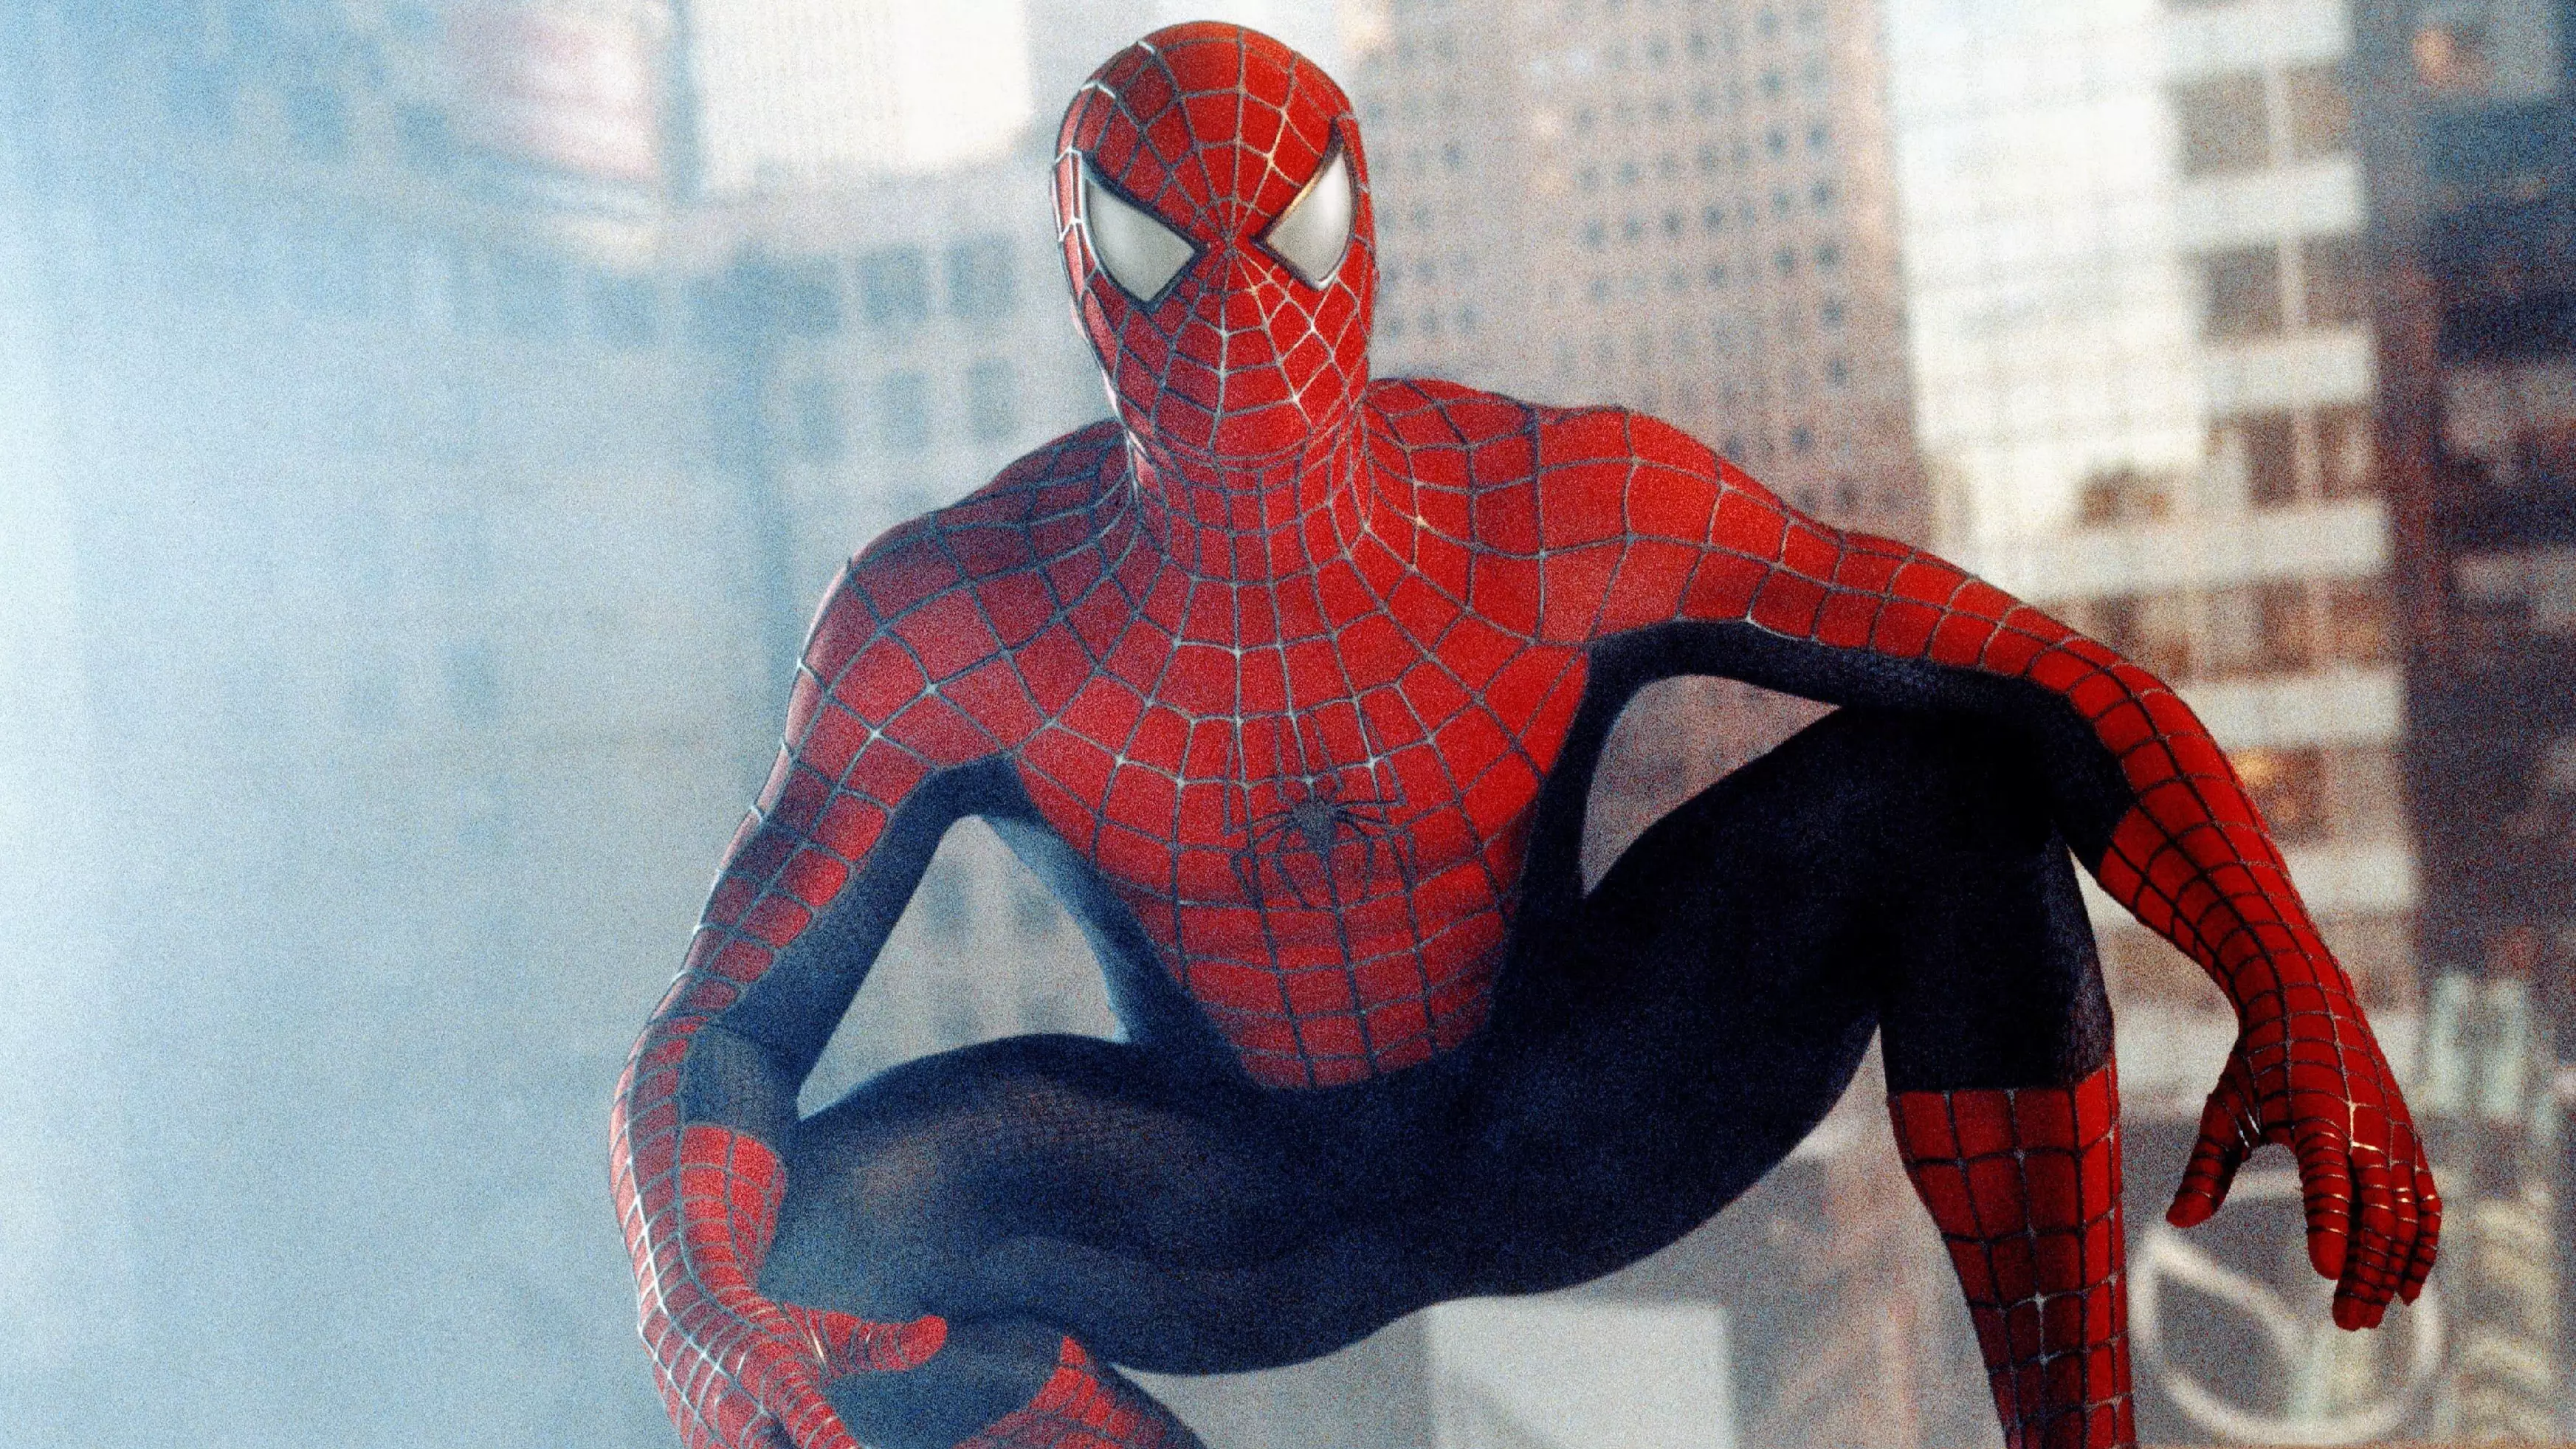 James Cameron Says His Spider-Man Was ‘The Greatest Movie I Never Made’